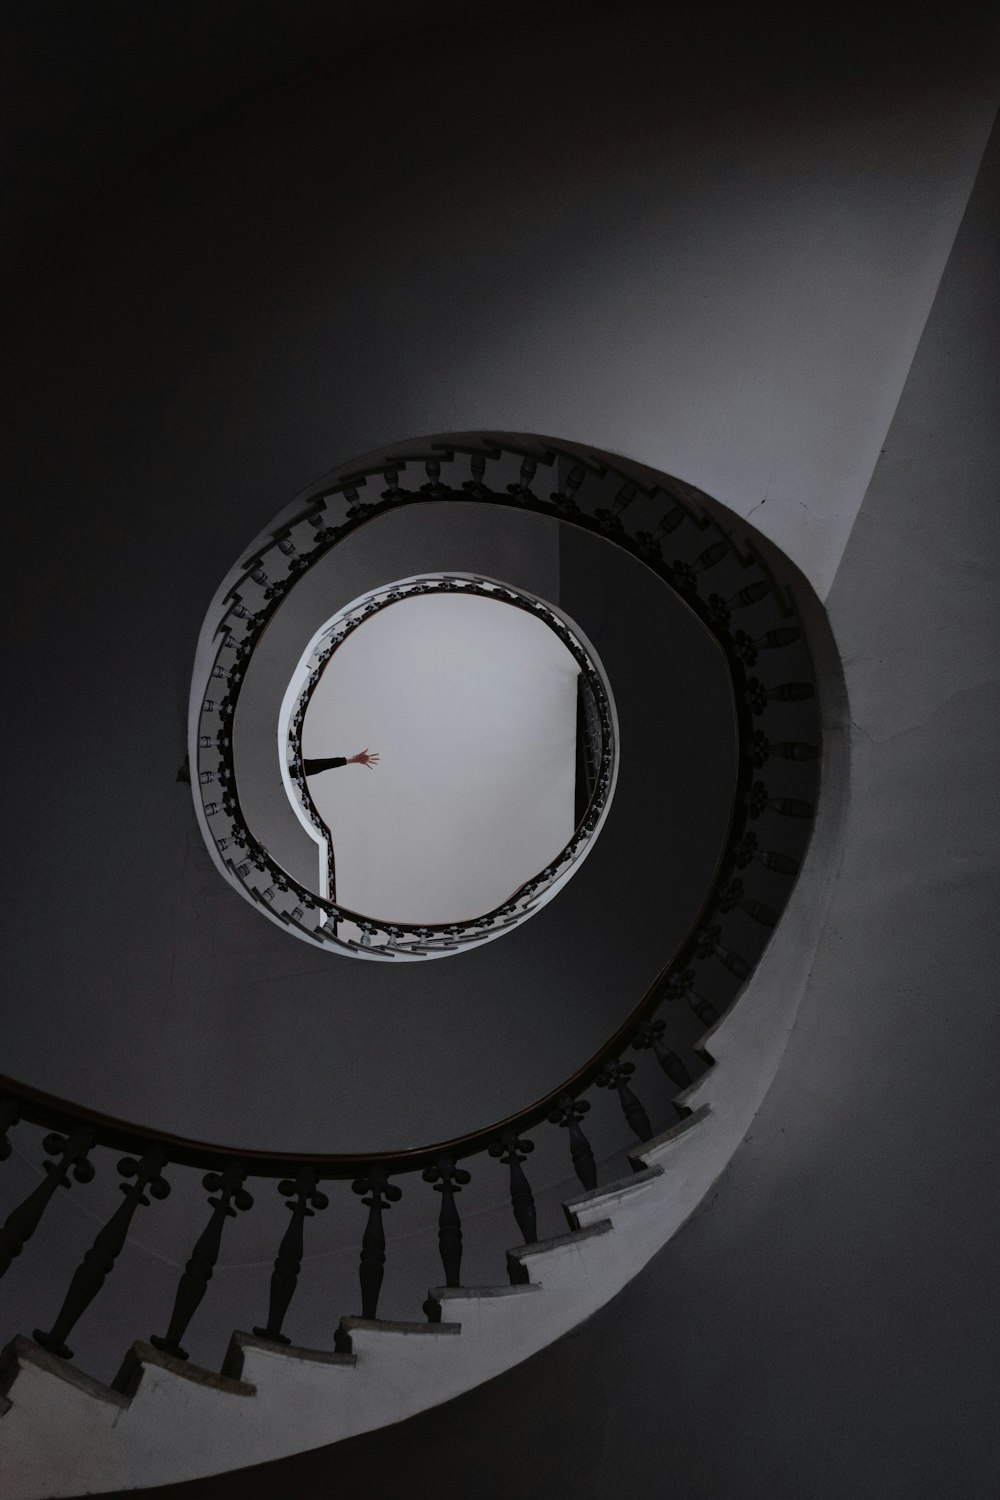 a spiral staircase with a clock on the wall